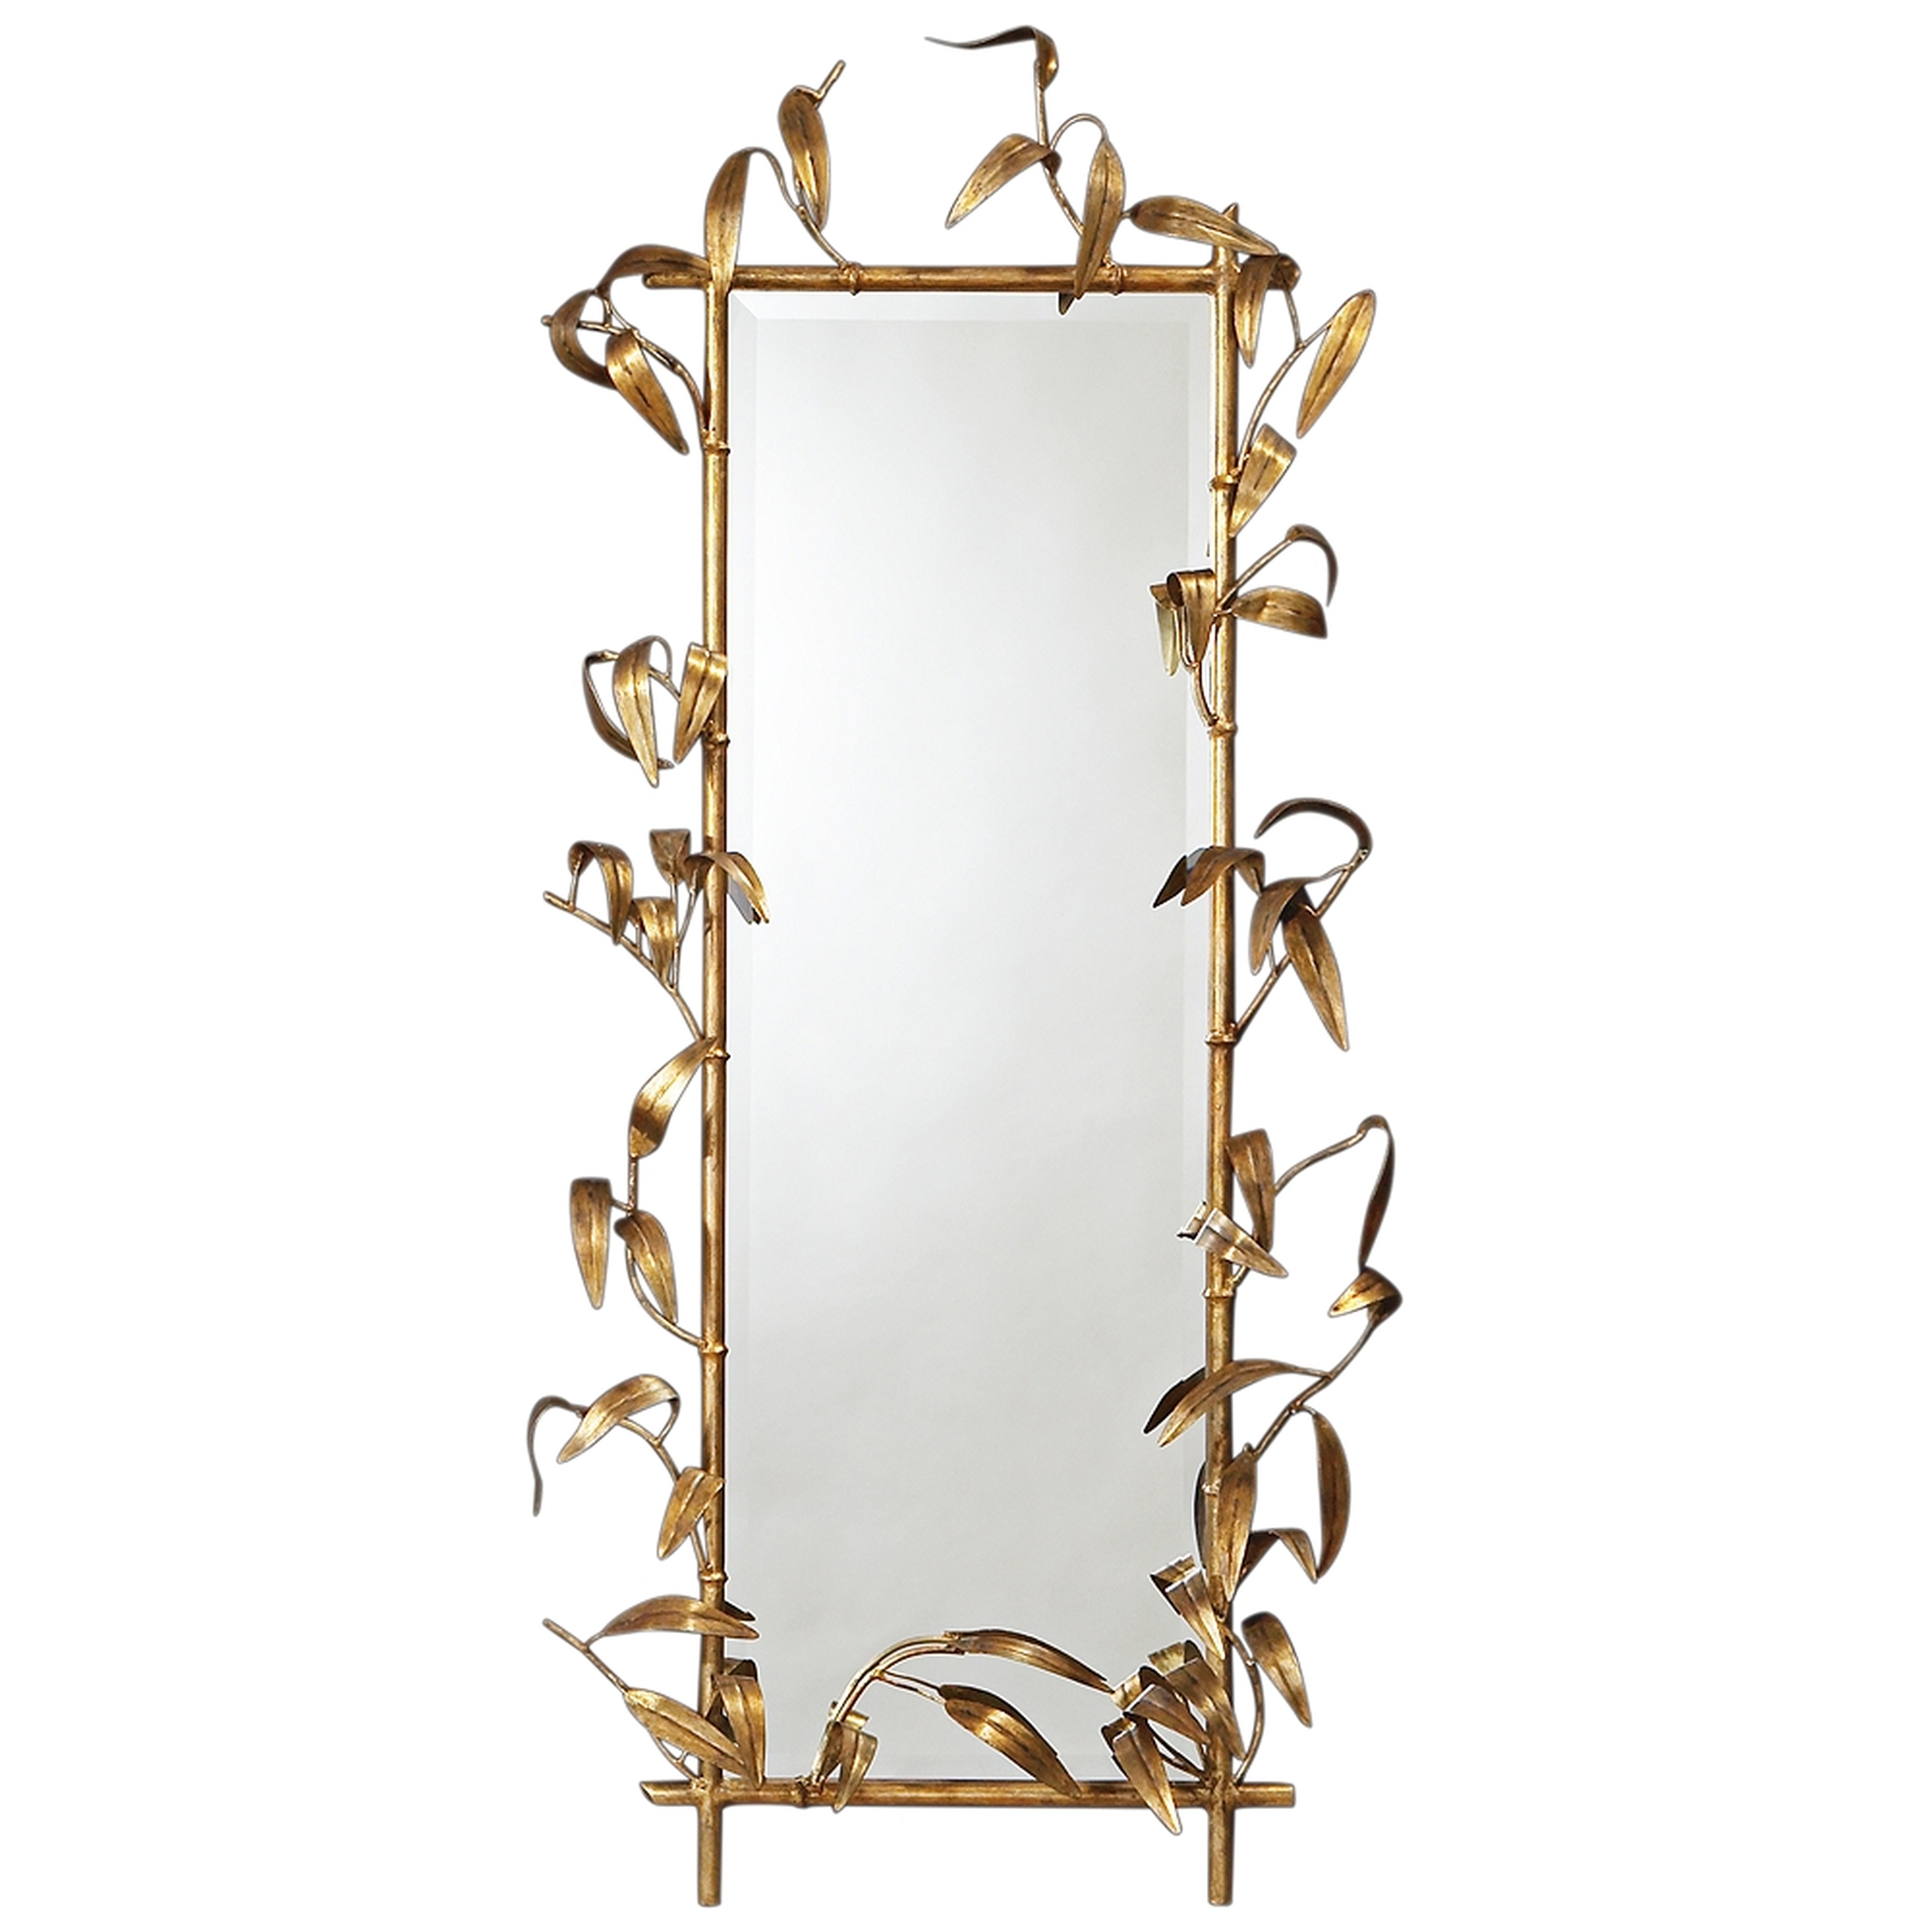 Bamboo Gold 28" x 49" Wall Mirror - Style # 20J04 - Lamps Plus